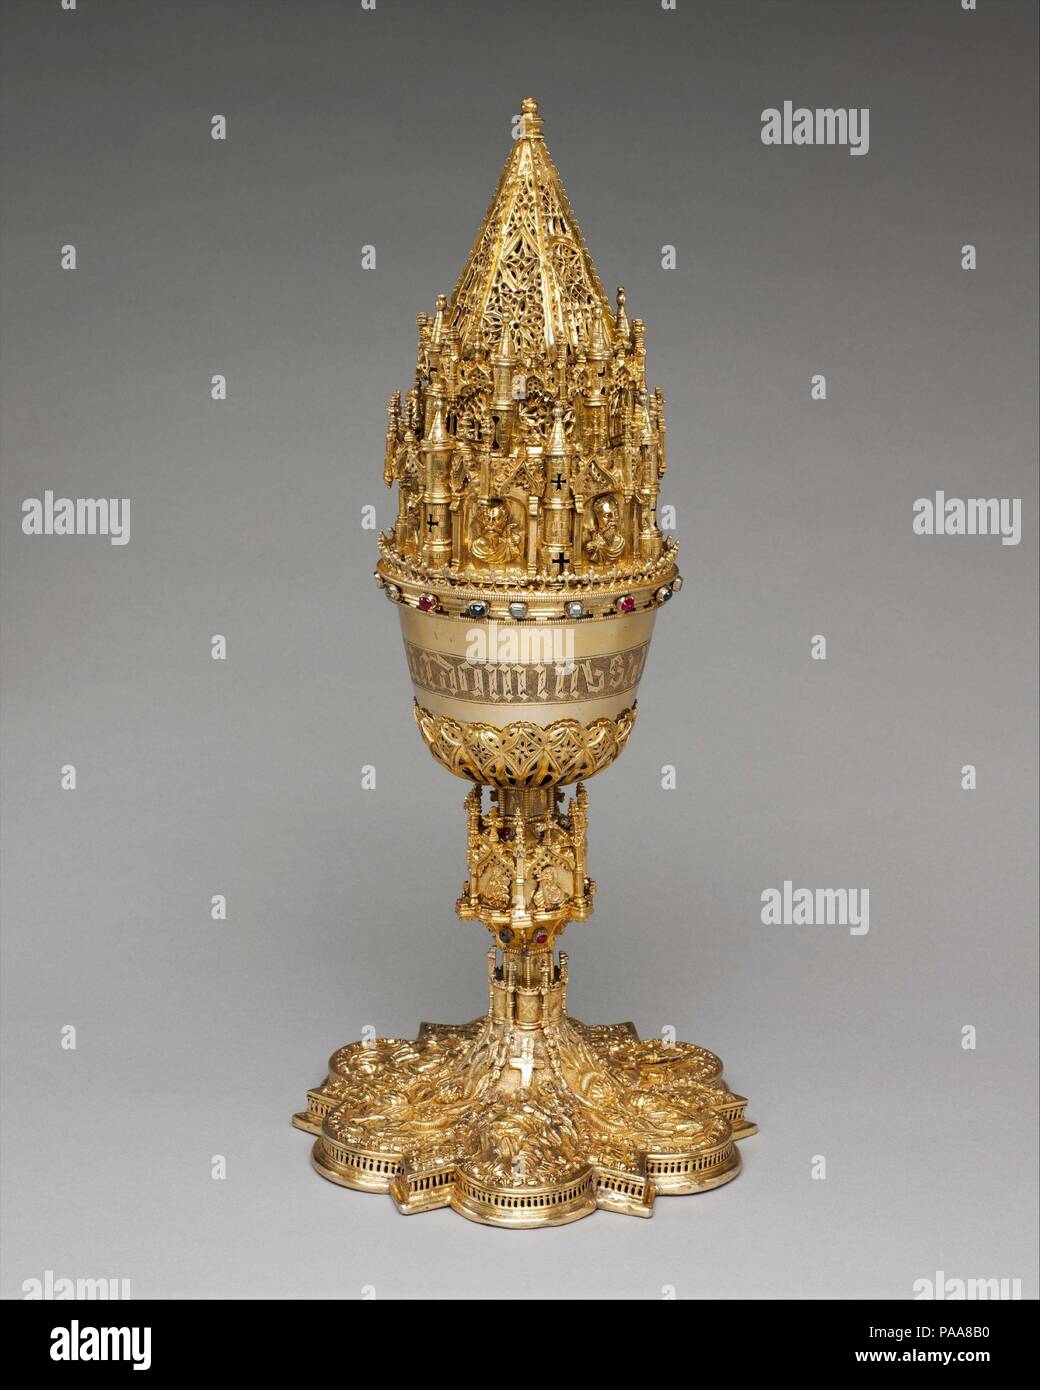 Covered Chalice Culture Spanish Dimensions Overall 17 3 16 X 7 3 4 In 43 7 X 19 7 Cm Date Late 15th Century The Rare Openwork Cover On This Spanish Chalice With Its Elaborate Ornament